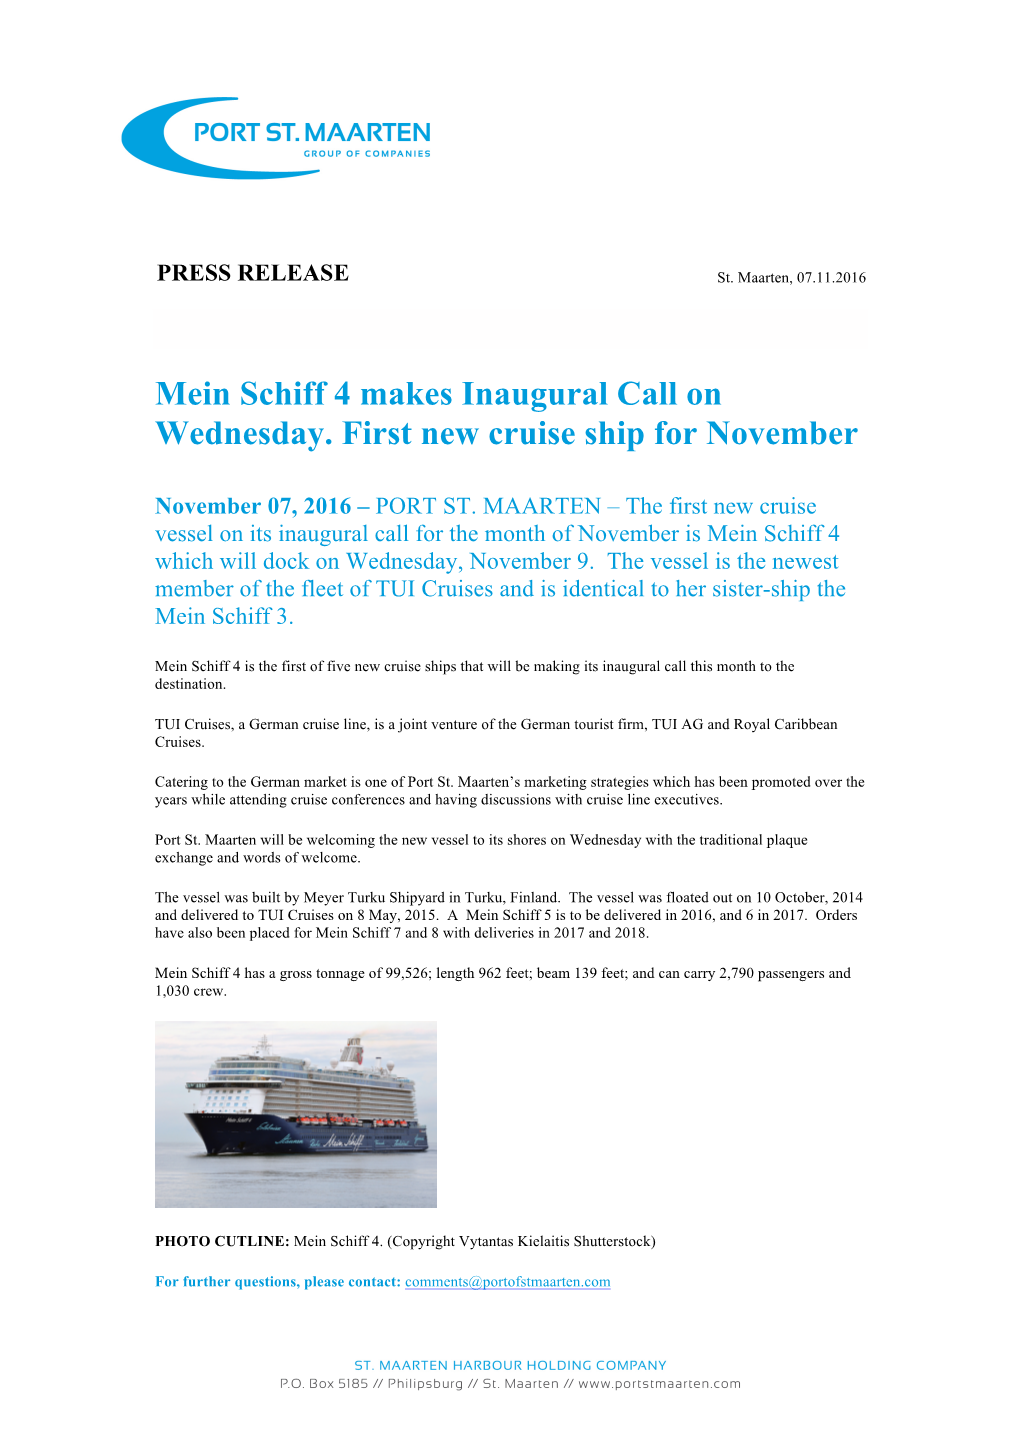 Mein Schiff 4 Makes Inaugural Call on Wednesday. First New Cruise Ship for November